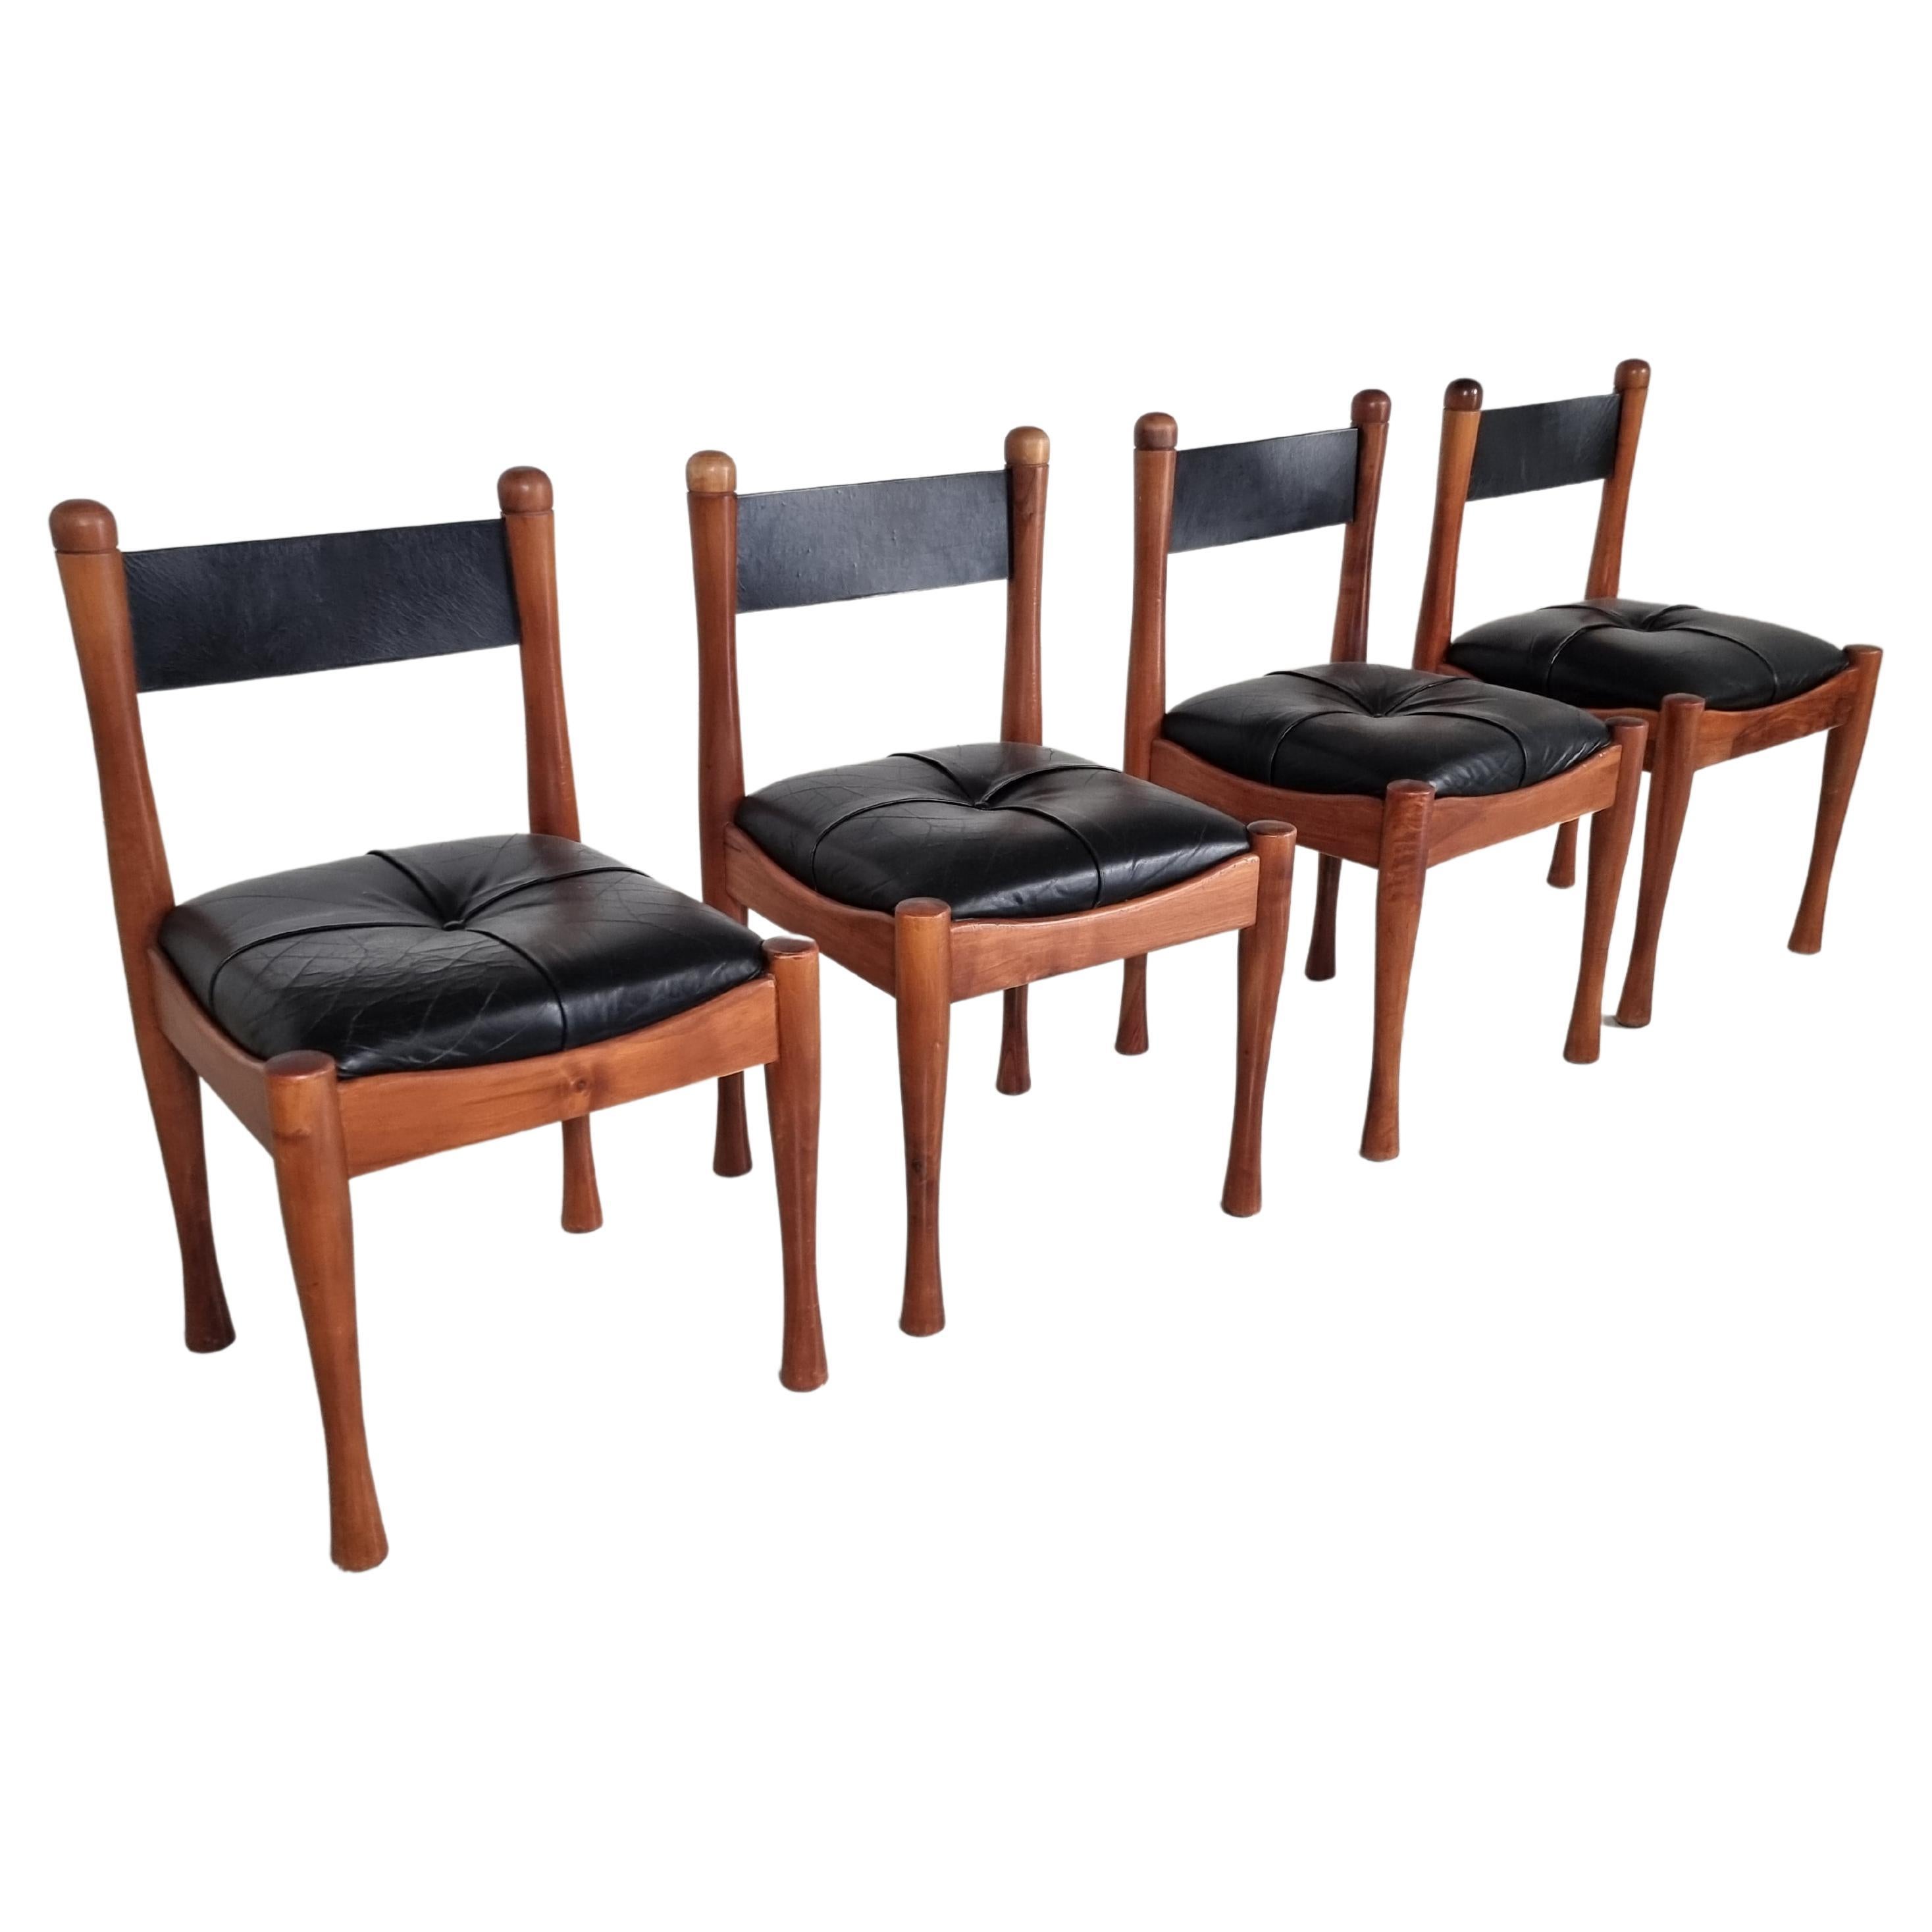 Set of 4  dining chairs by Silvio Coppola for Bernini, 1960s